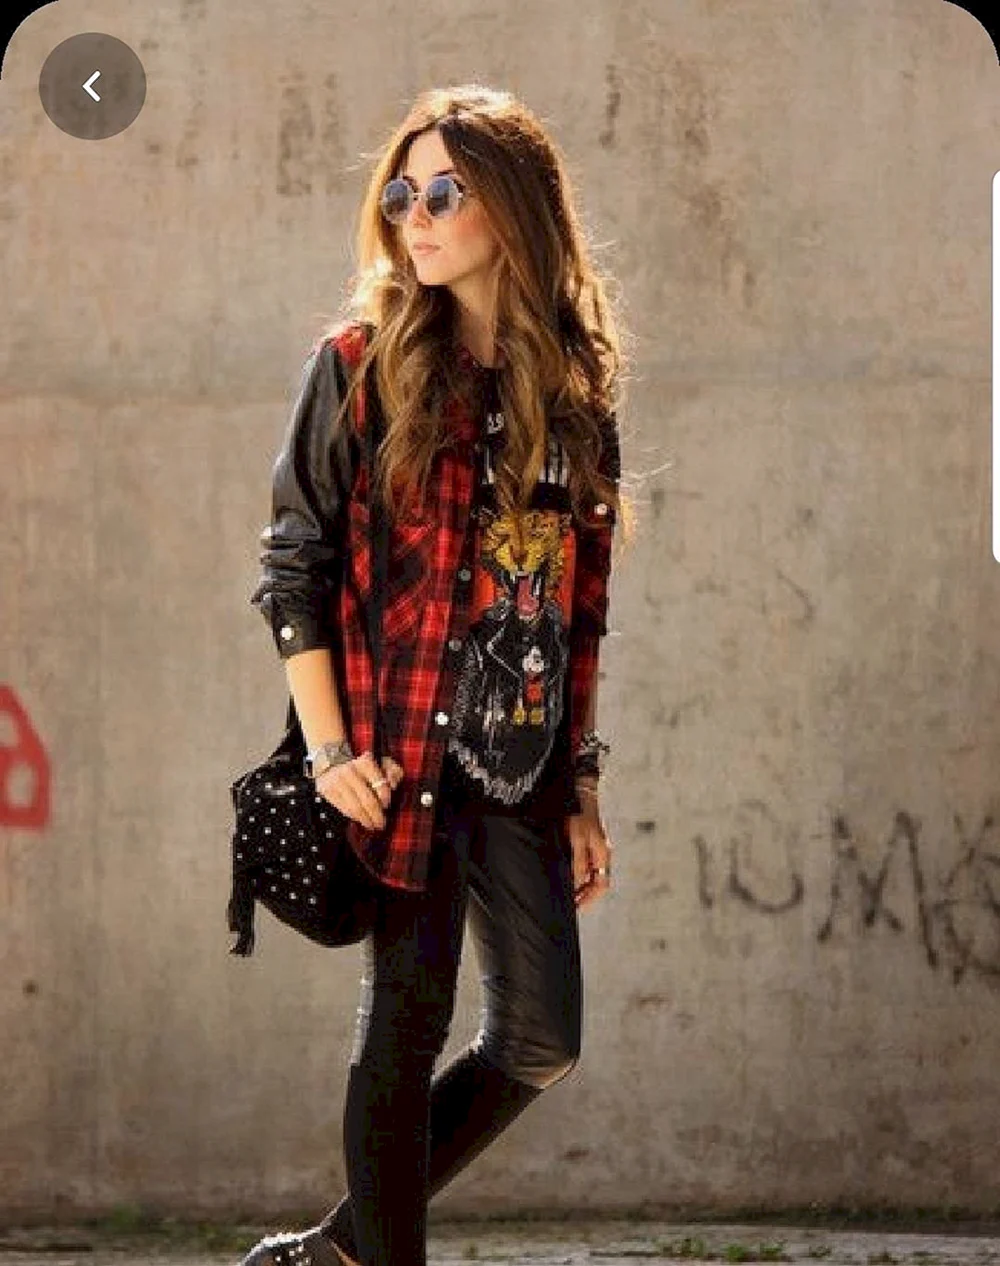 Glam Rock outfit